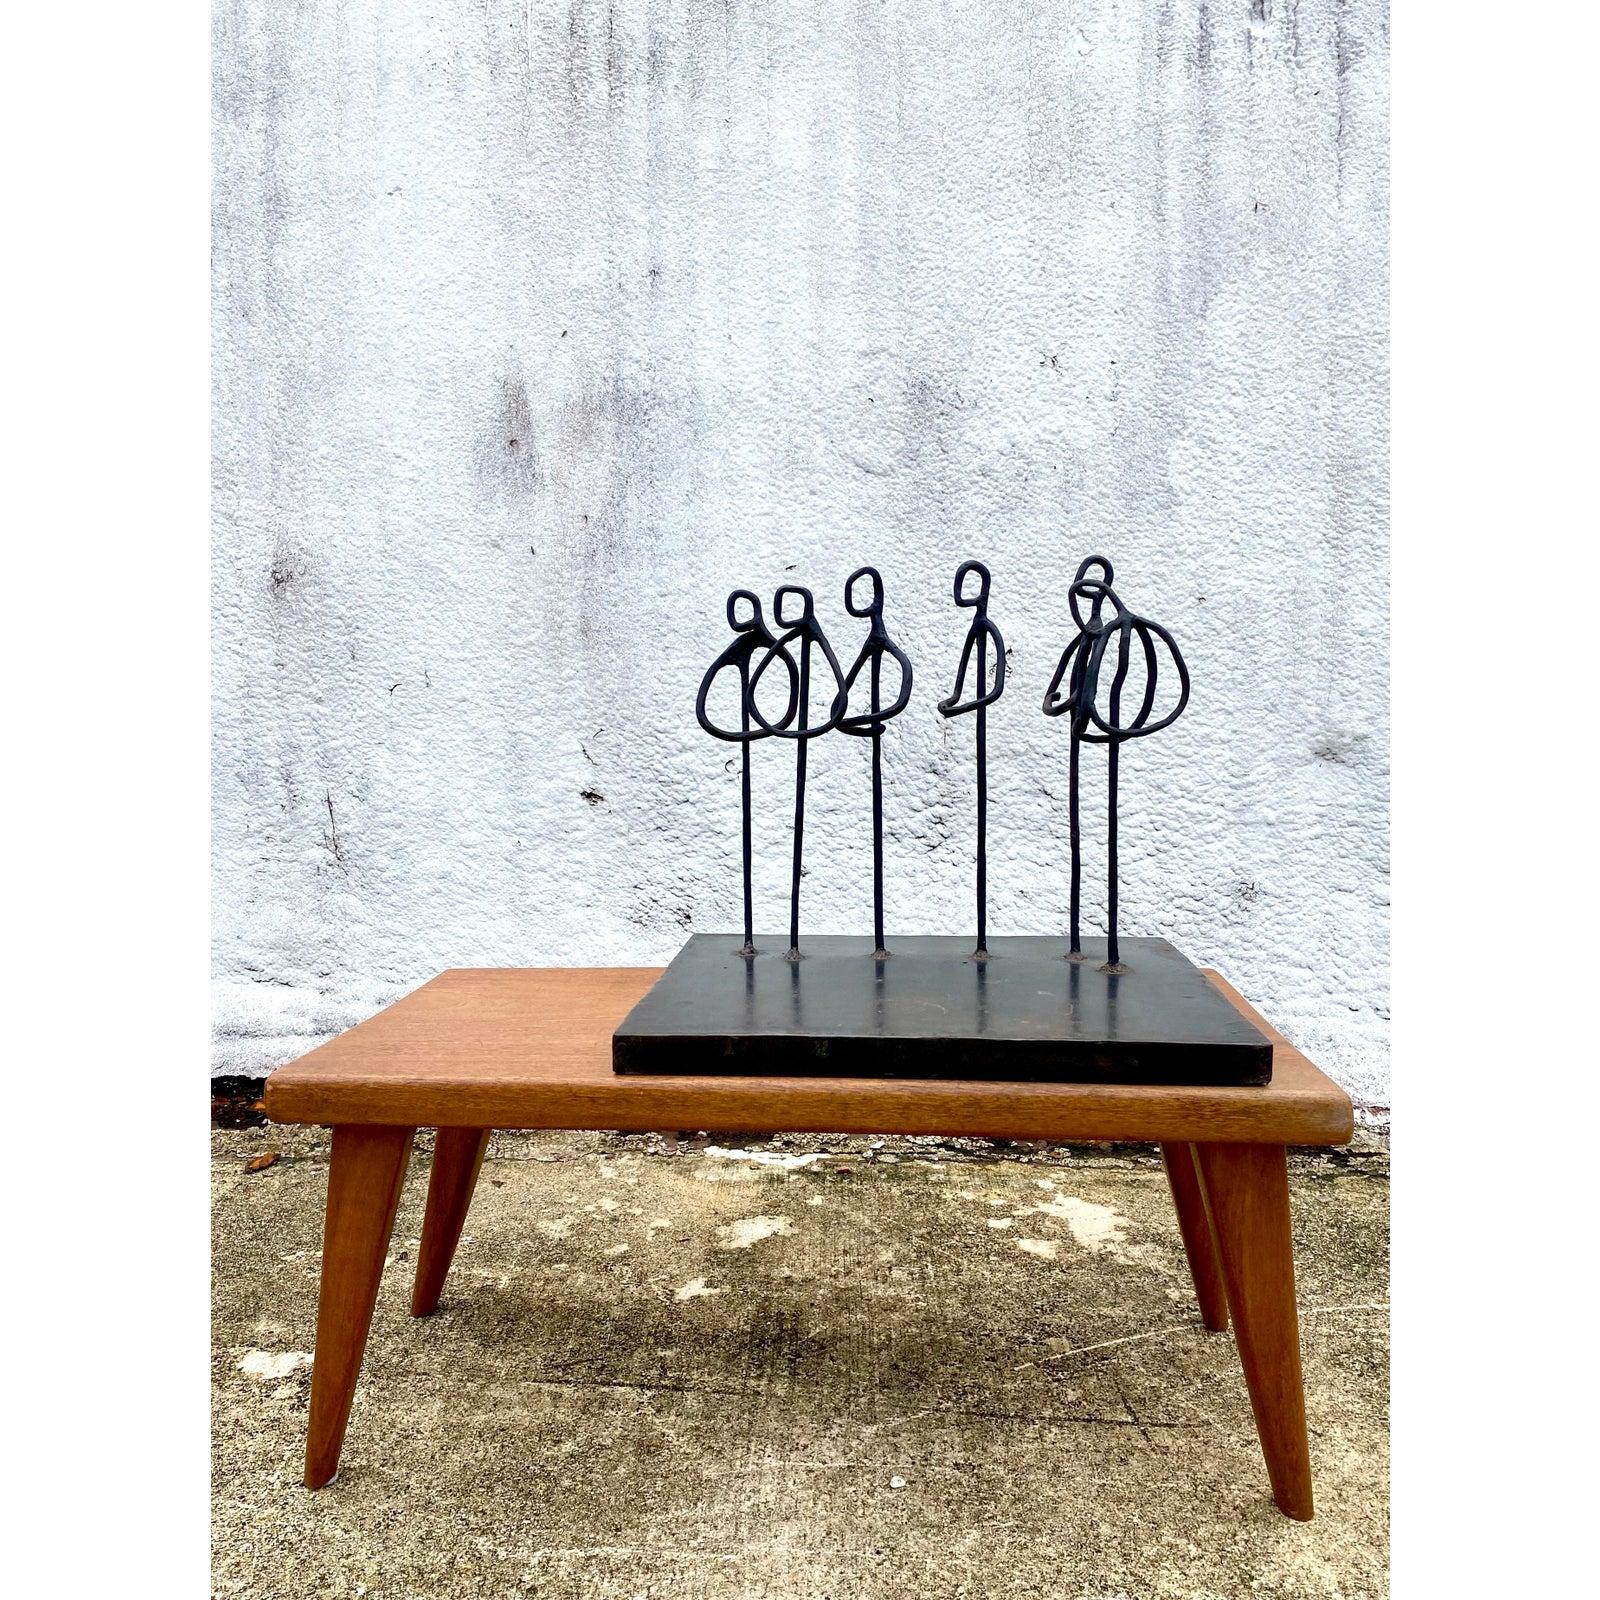 Incredible vintage original iron sculpture. An abstract composition of ring figures in a gathering. Beautiful and simple. Signed by the artist ACS. Acquired from a Hobe Sound estate.